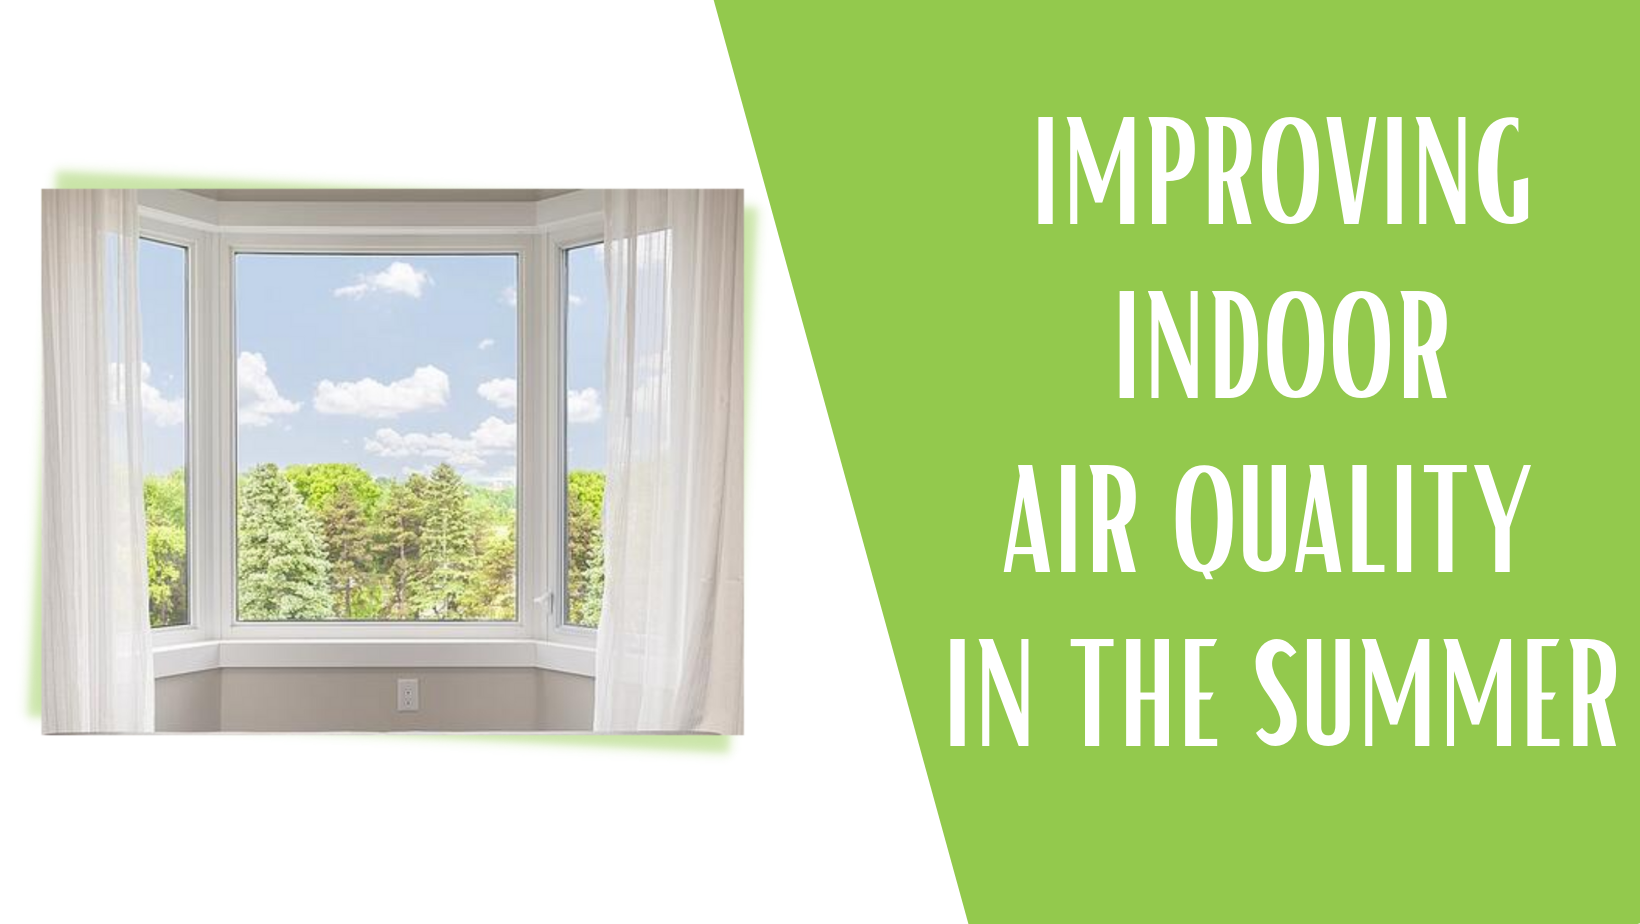 Healthy indoor air quality